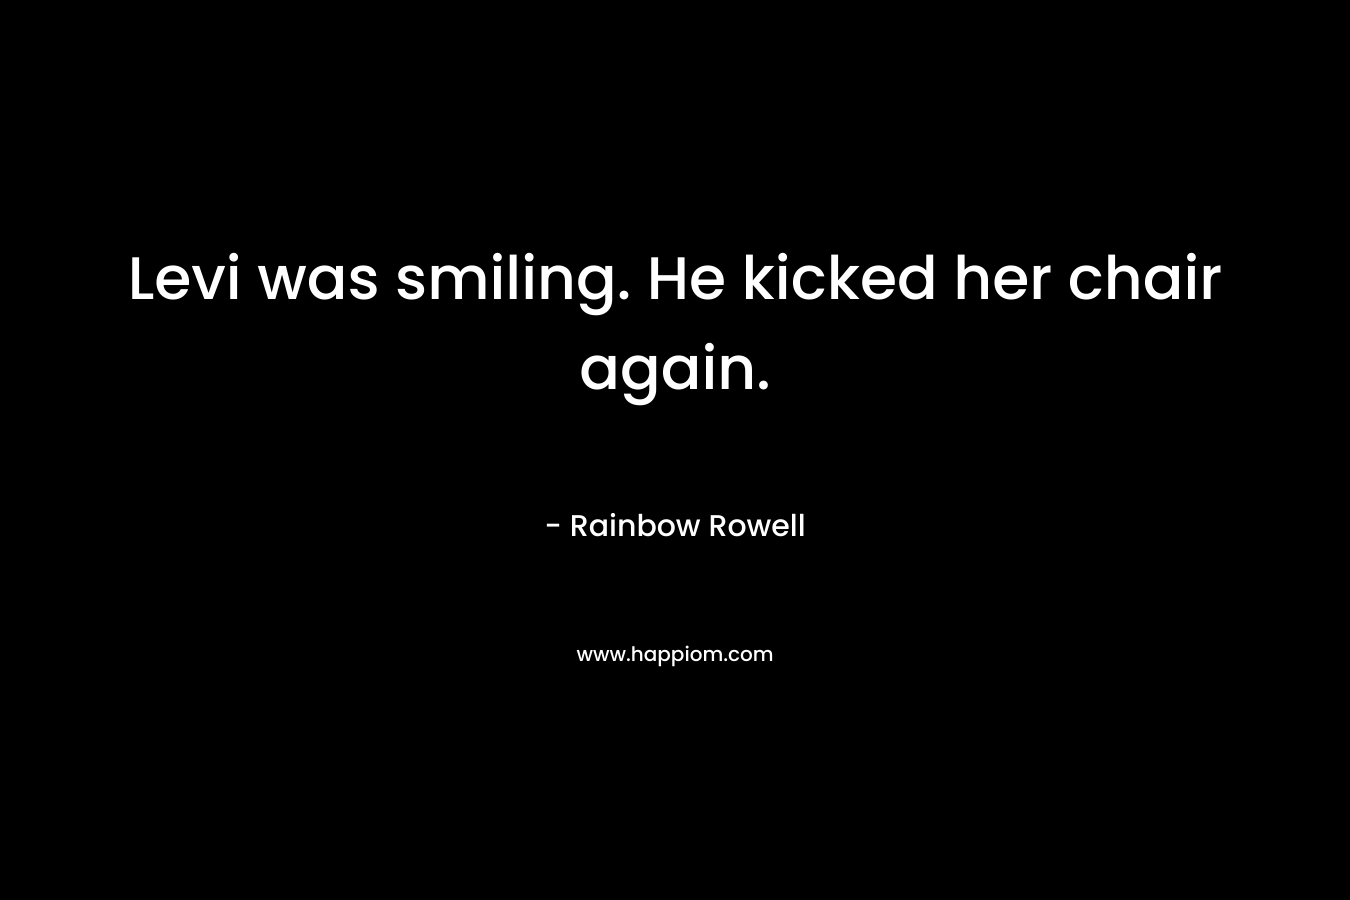 Levi was smiling. He kicked her chair again. – Rainbow Rowell